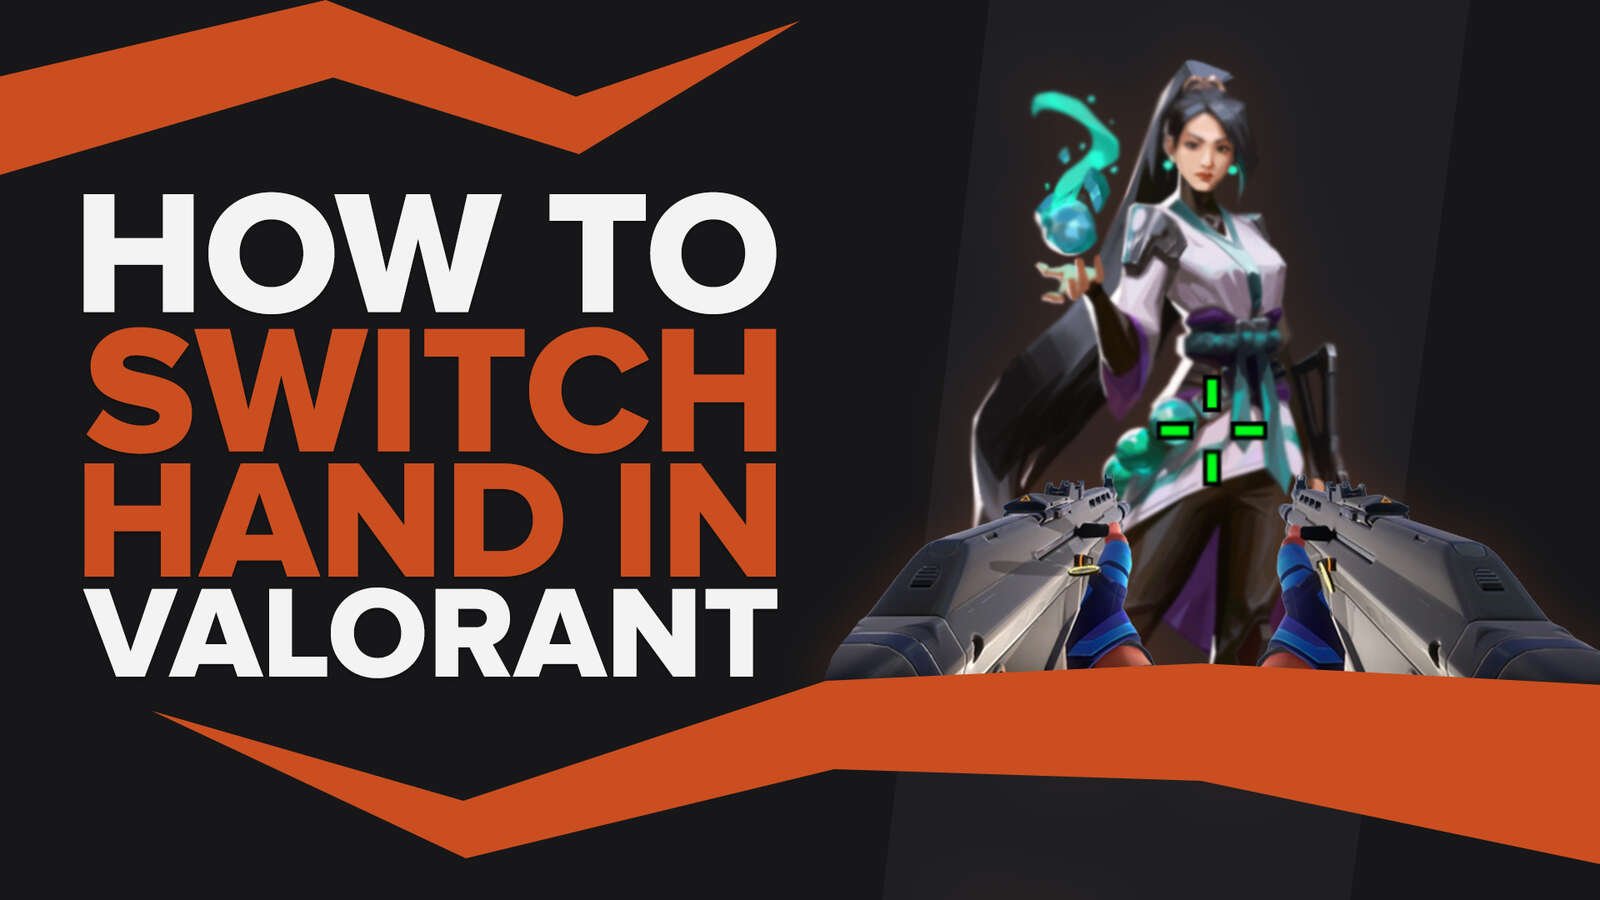 How To Switch Hand in Valorant [Step-by-Step]